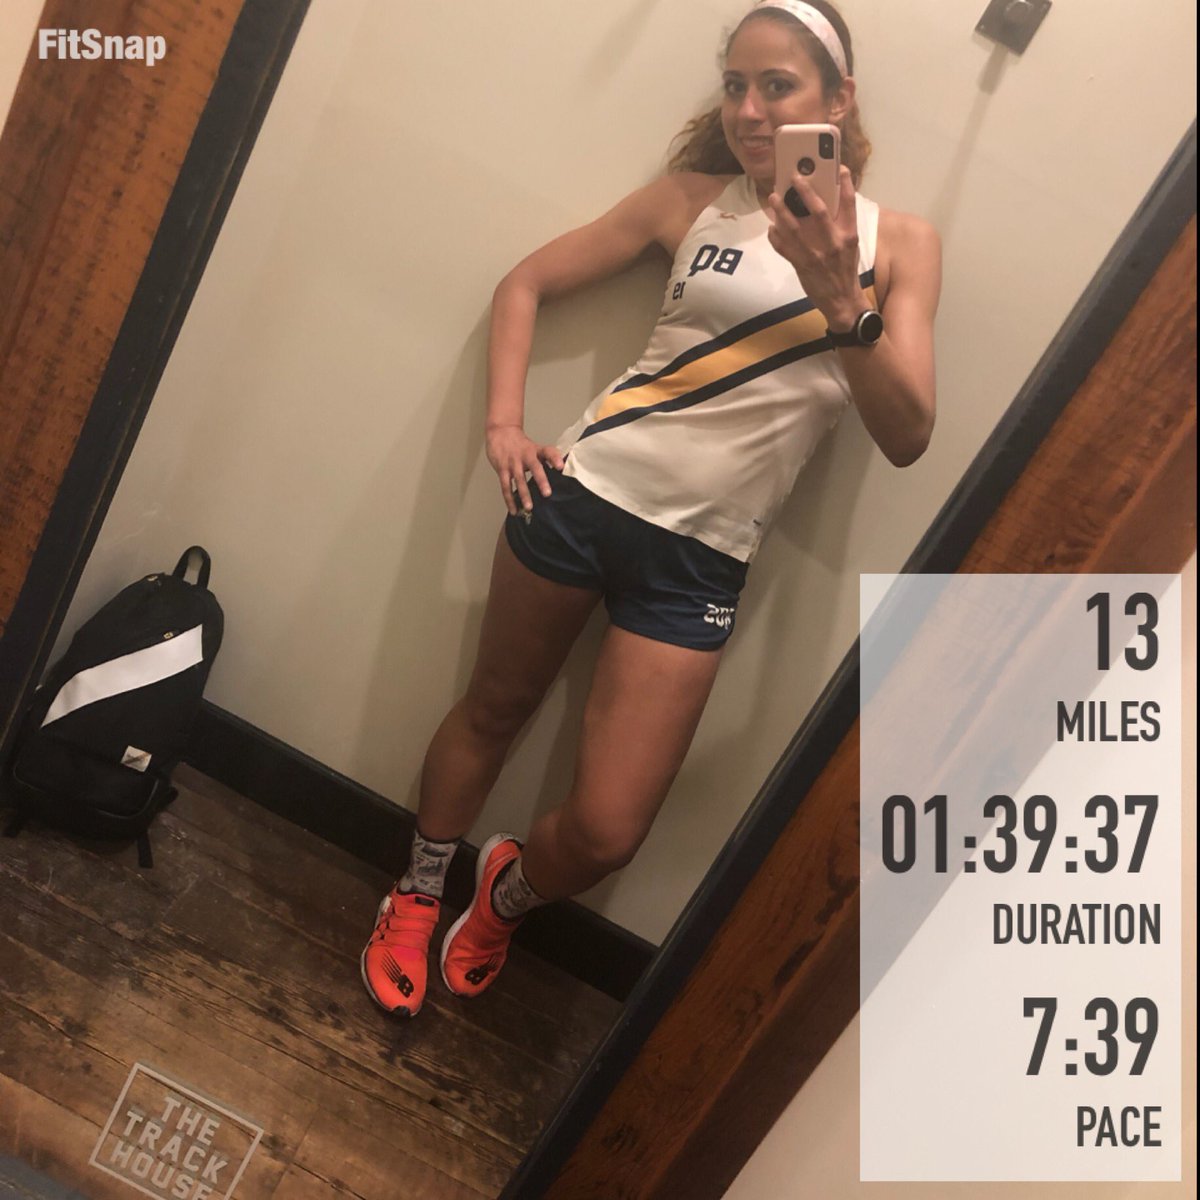 Can’t believe that in 1 week, we’ll at start for #Boston2019.. The #marathon may be #26point2 miles, but this journey is filled w/ many months of training/ #runningmiles, & hurdles.. after today’s last double digit #run, all that’s left is #TrustTheprocess #bqchat